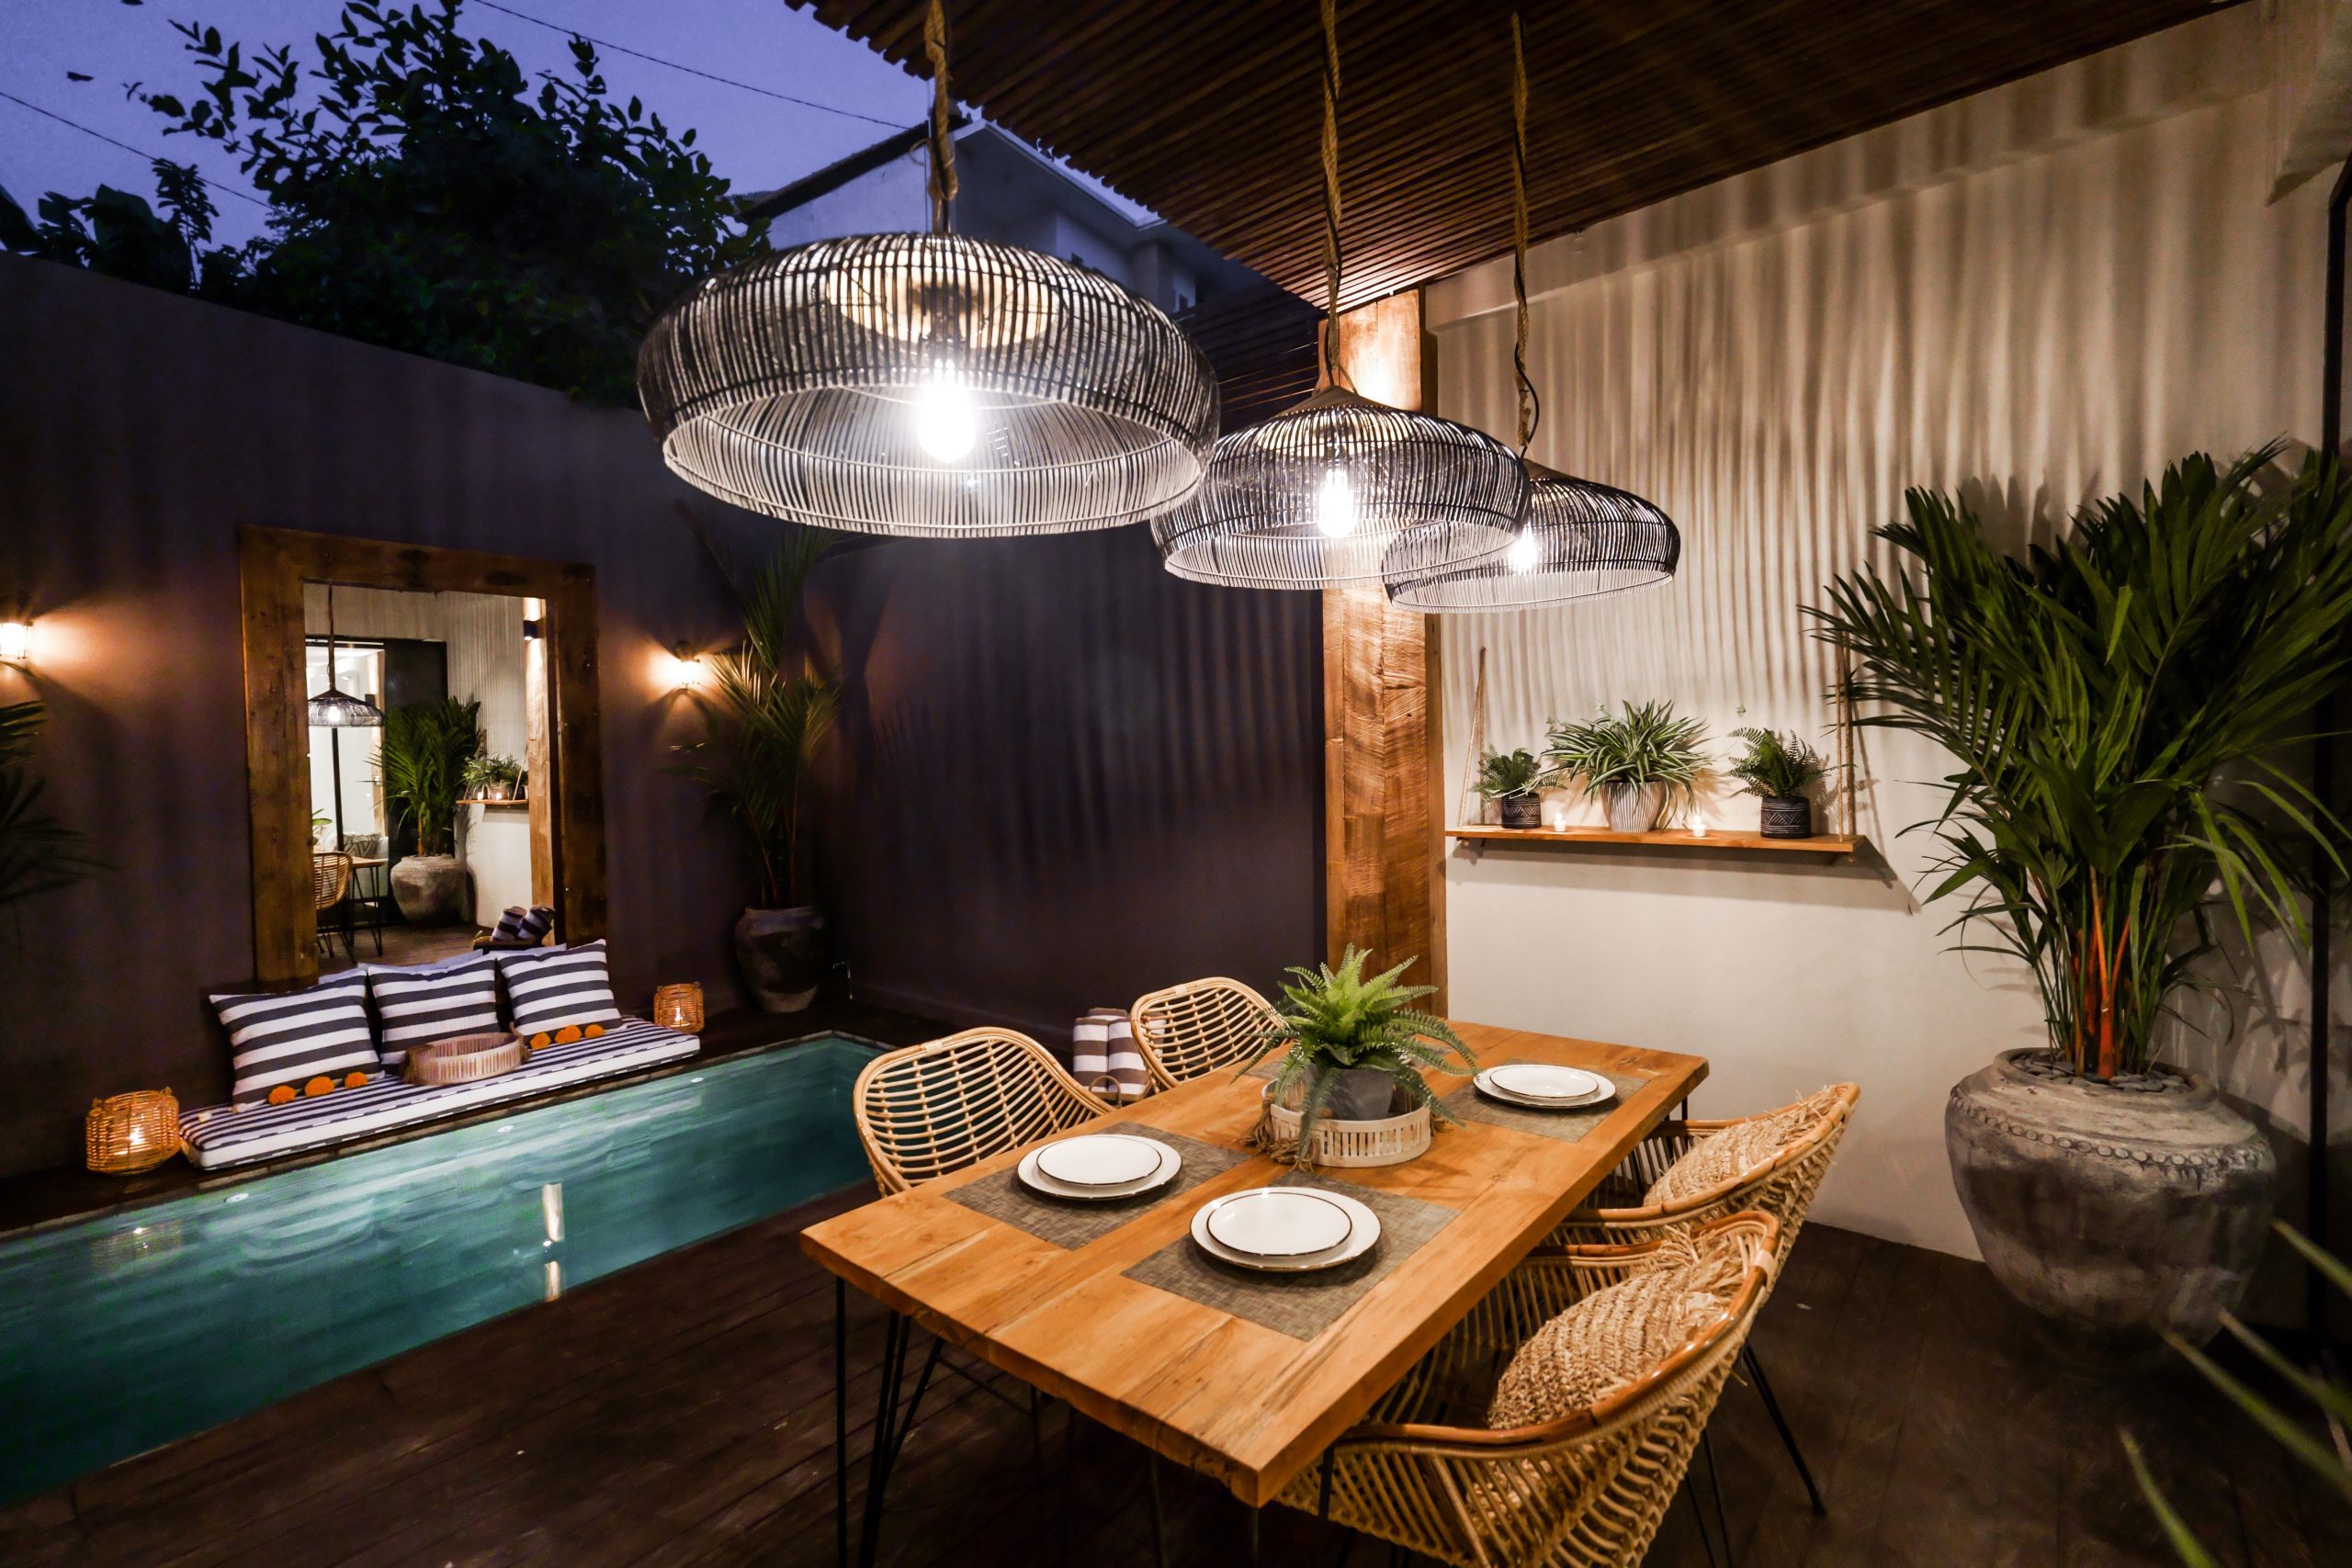 Modern Tropical Townhouse in Canggu with Private Plunge Pool and Stylish Interior Accommodation. Minutes away from Echo Beach and Batu Bolong - Ideal for Relaxation and Luxury Getaways